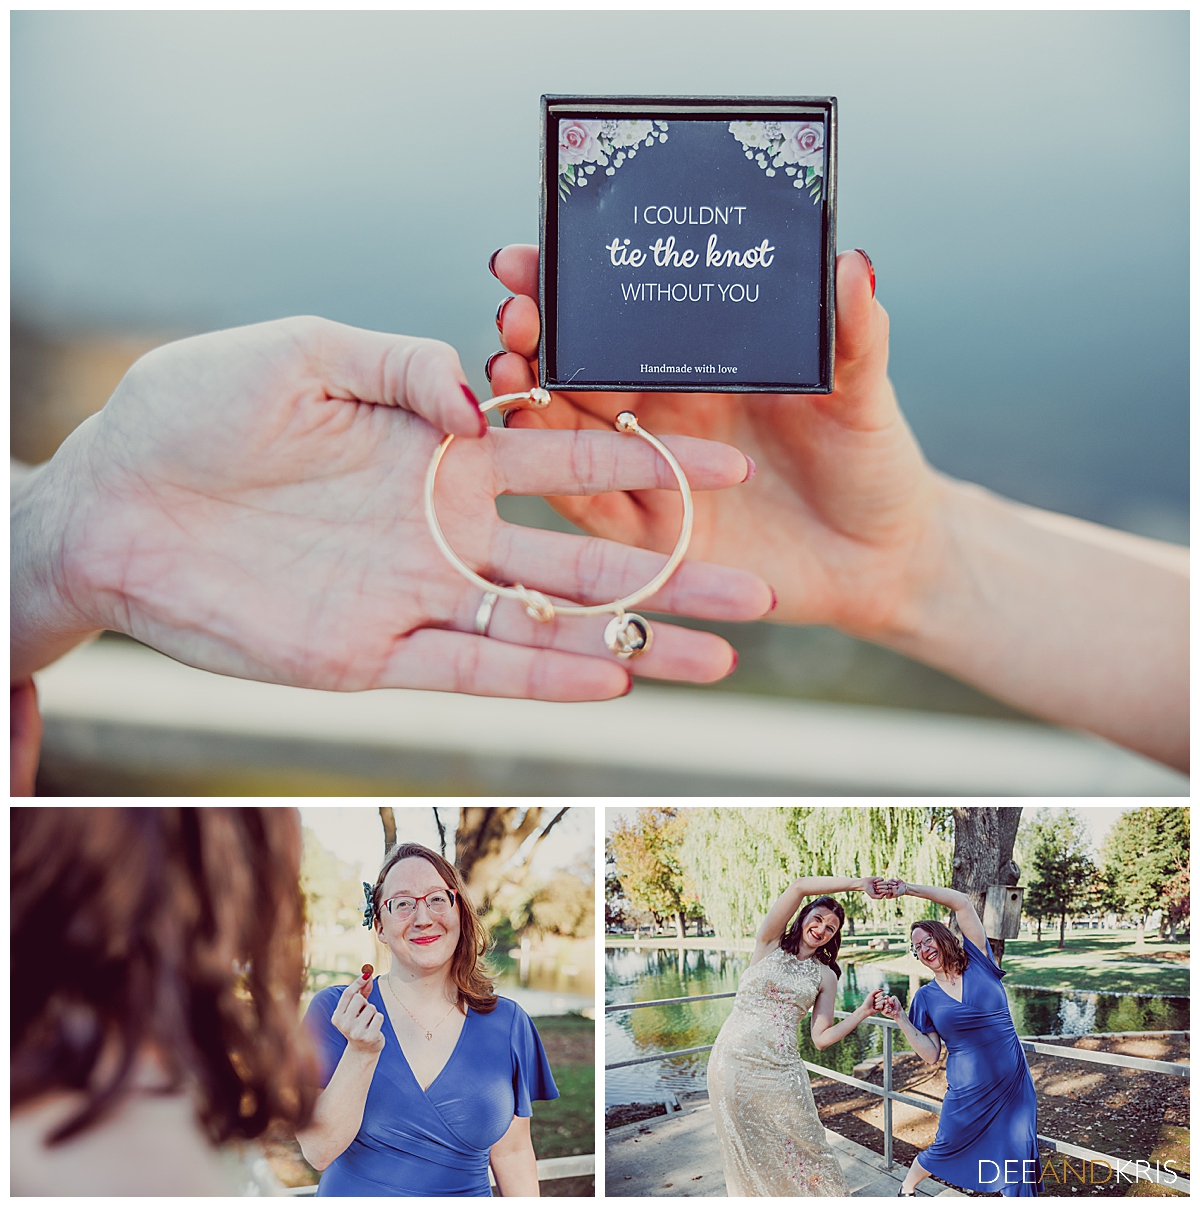 Three color images: Top image of maid of honor gift